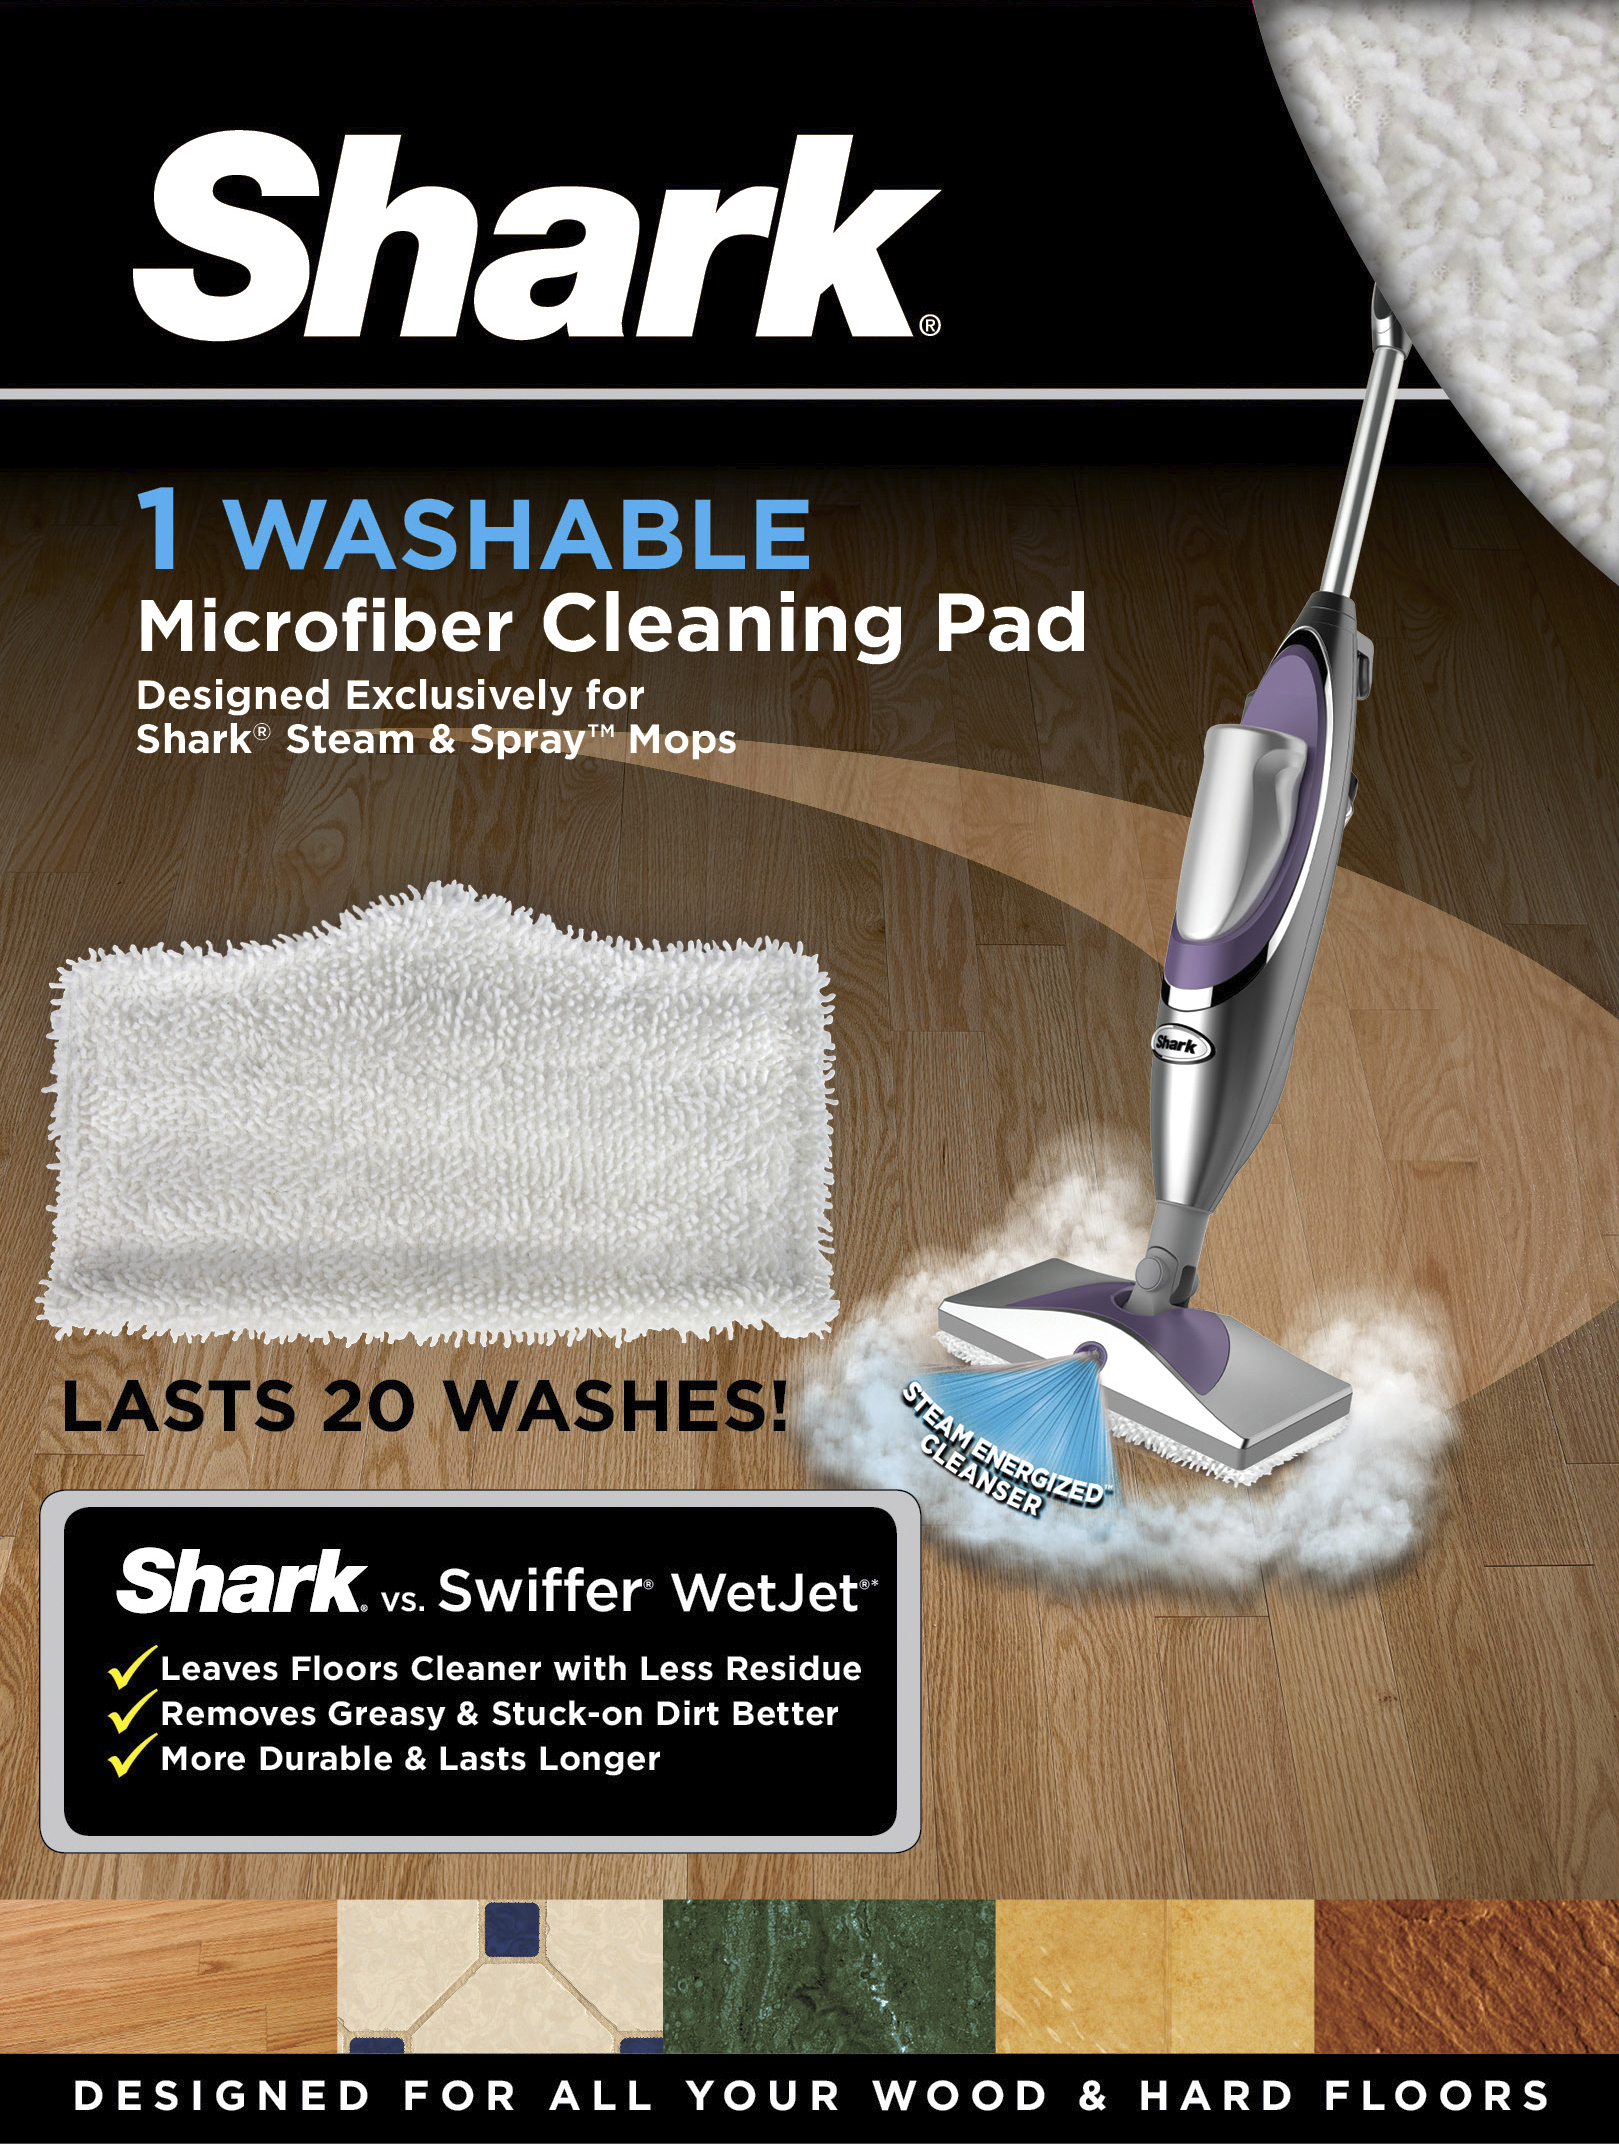 Shark Washable Microfiber Cleaning Pad, 1 count, compatible with Shark Steam Mop S1000WM - image 2 of 7